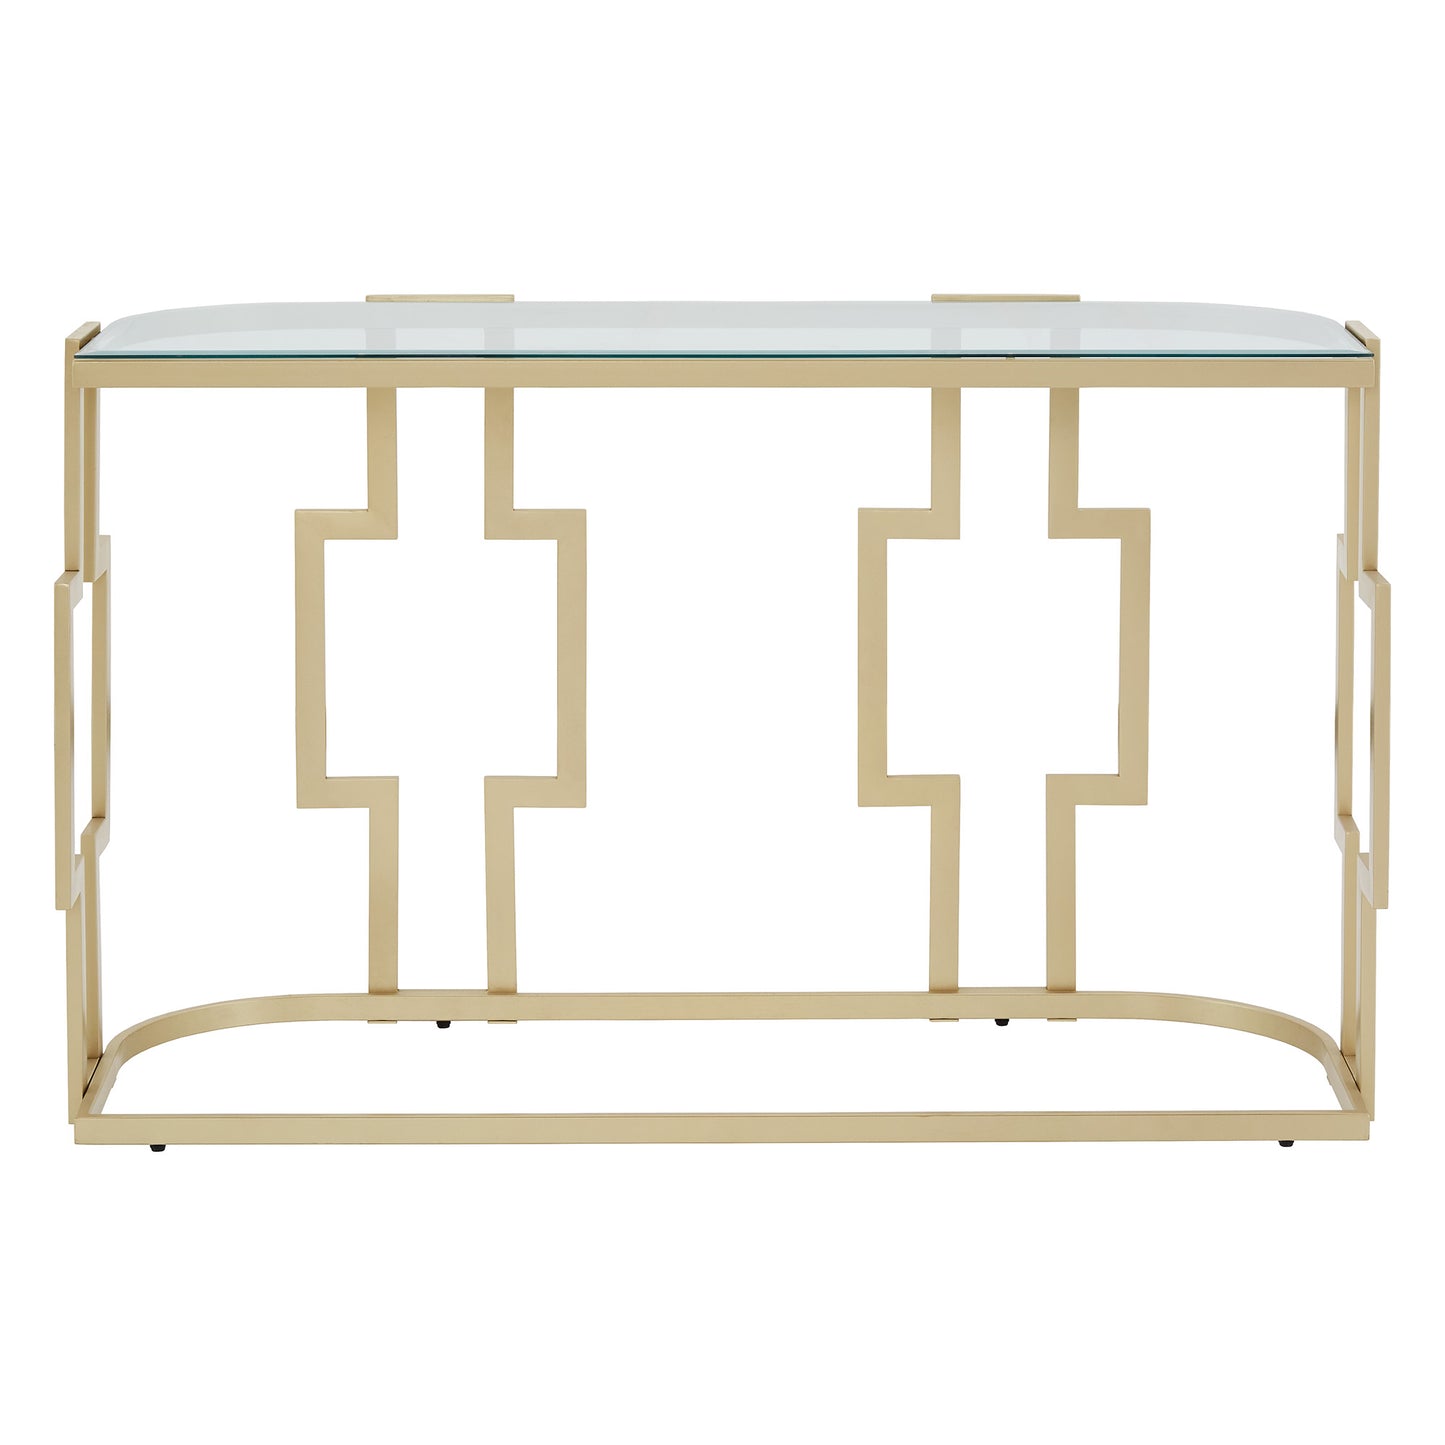 48" Console Table - Matte Gold Finish, Clear Glass Top